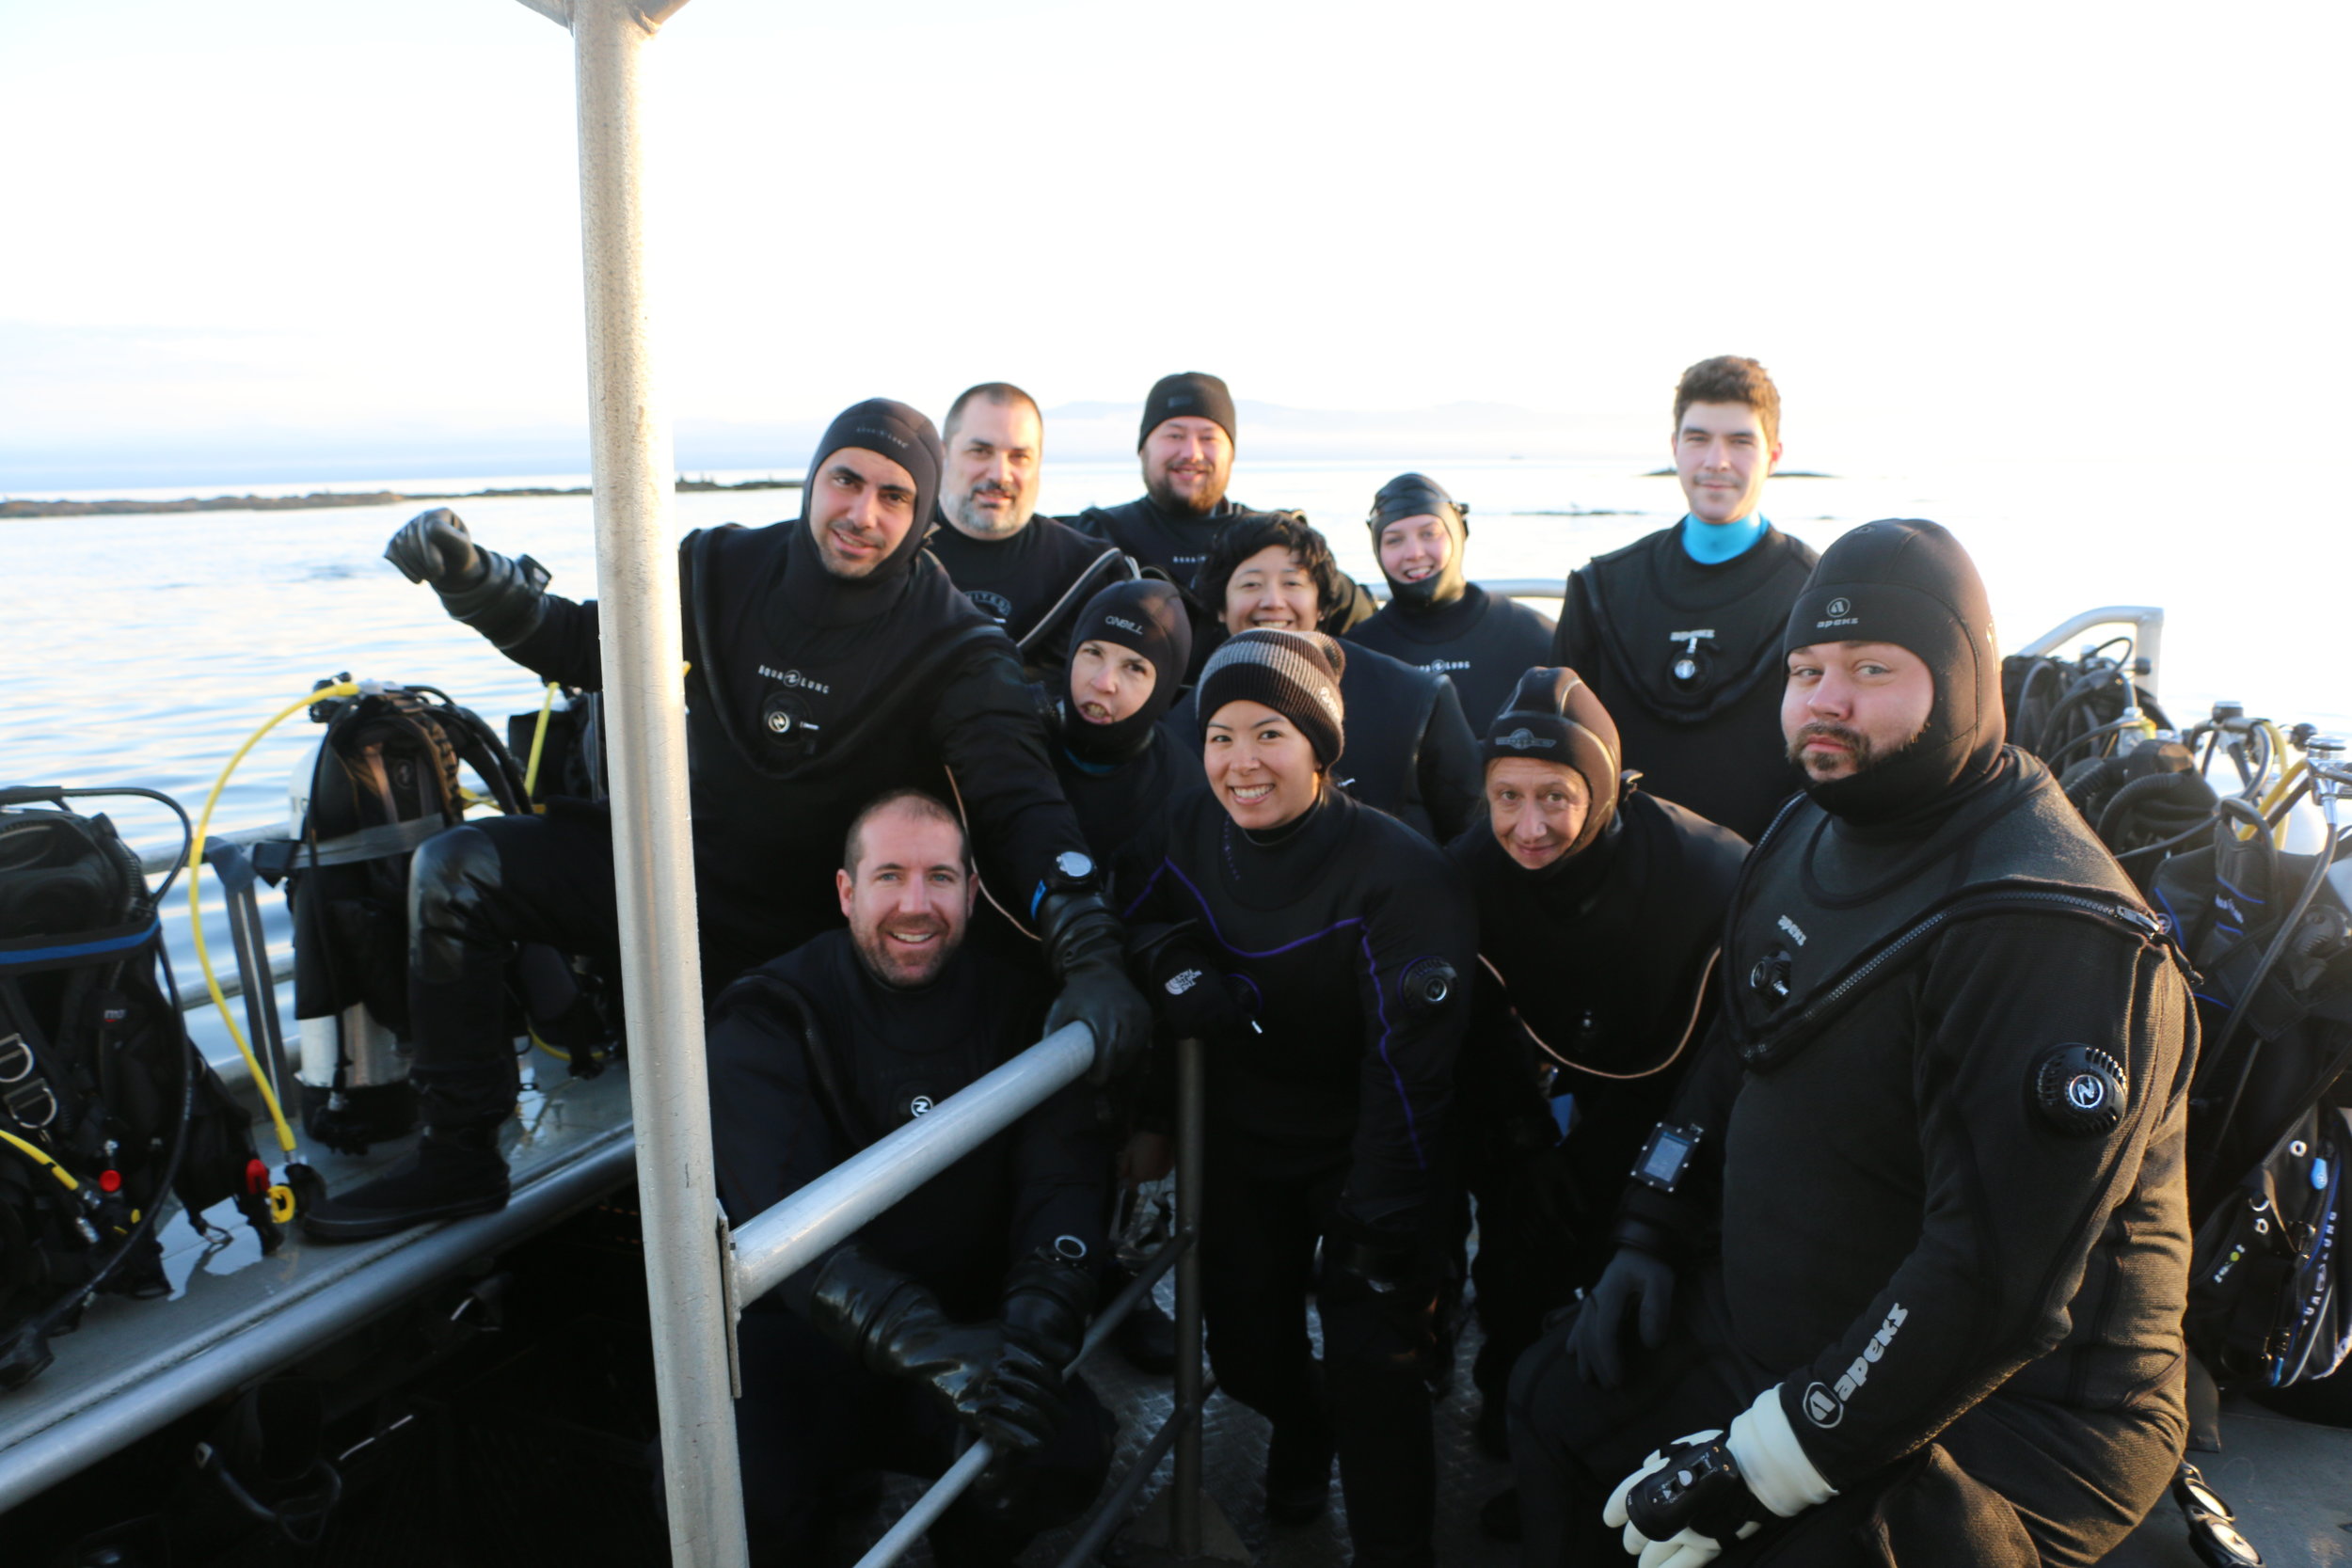 Post-Dive Group Photo